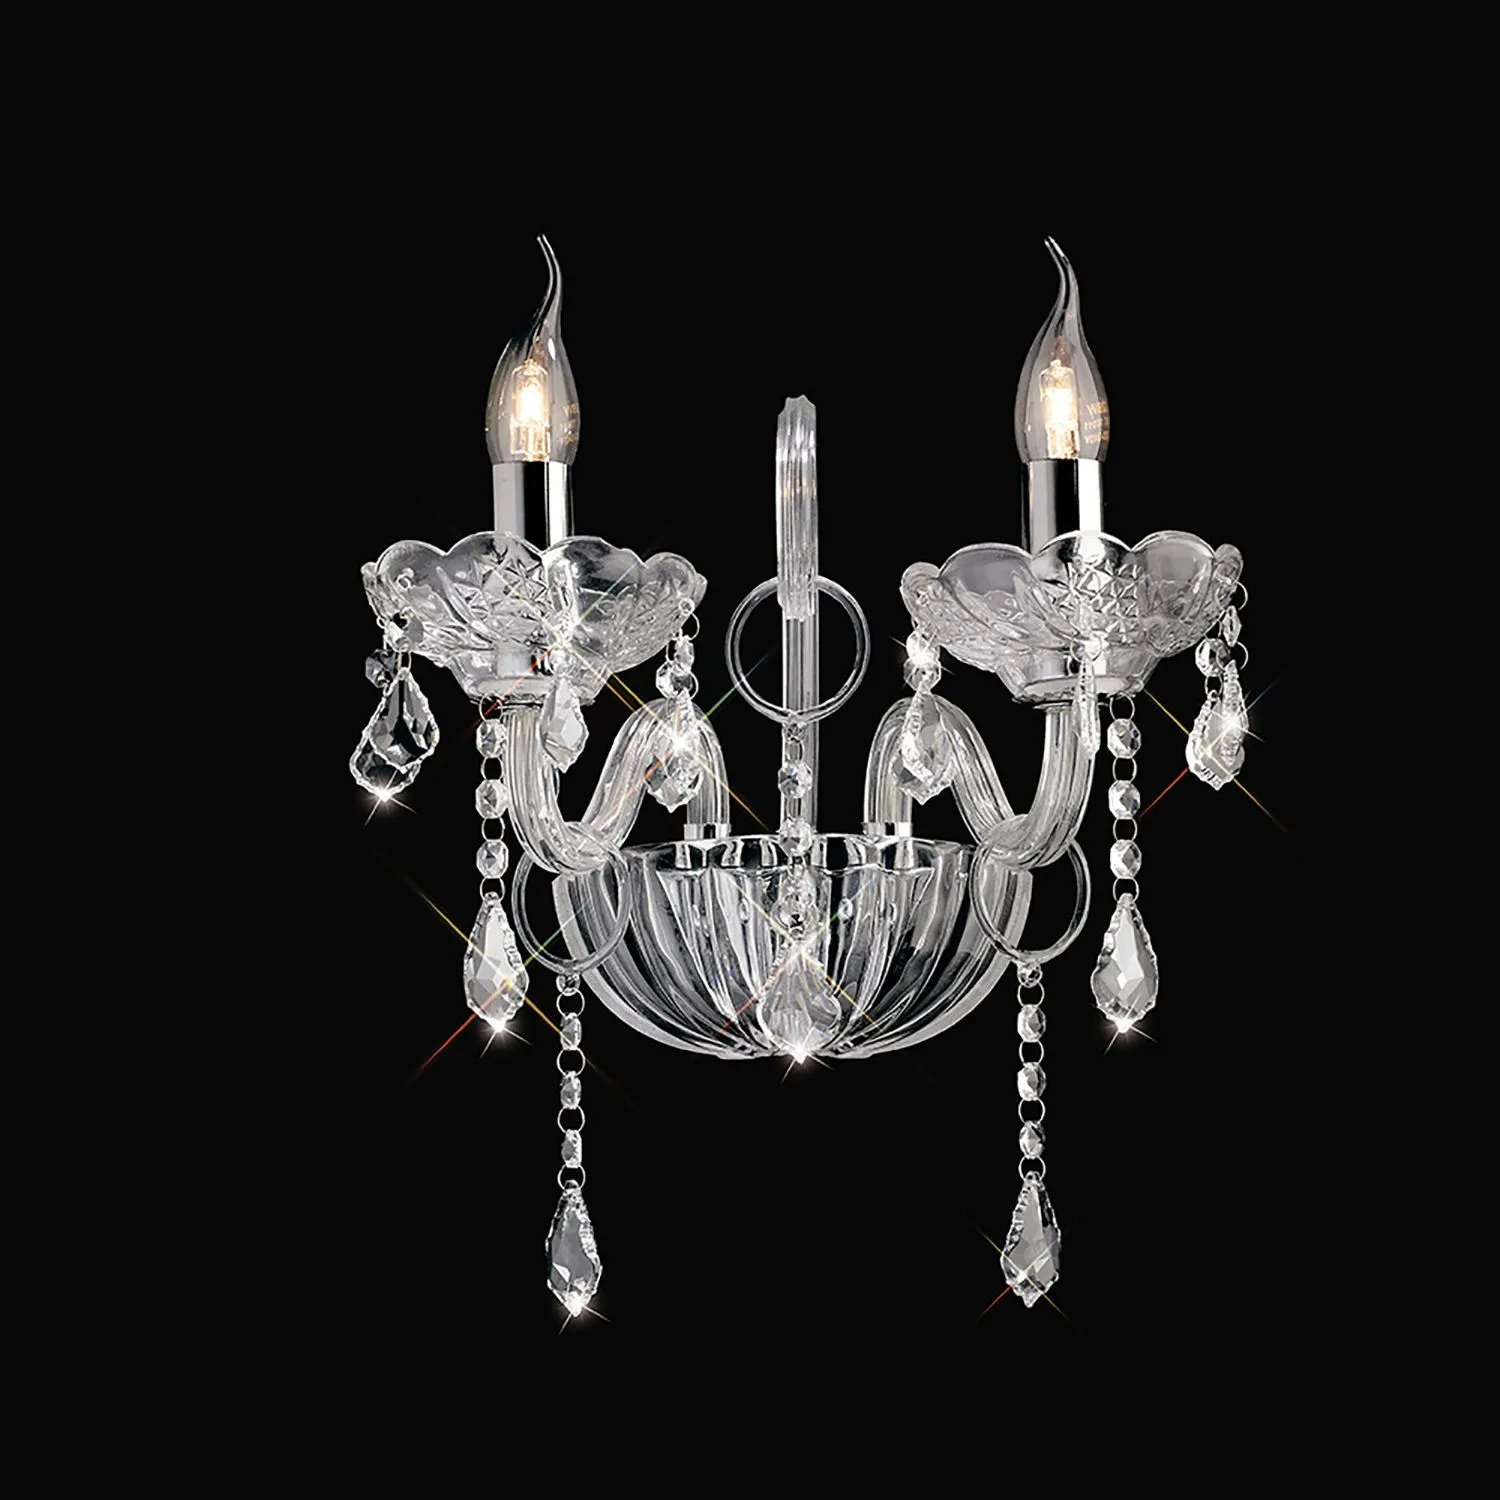 Tiana Wall Lamp 2 Light E14 Polished Chrome Glass Crystal (Item is Not Suitable For Mail Order Sales, COLLECTION ONLY)